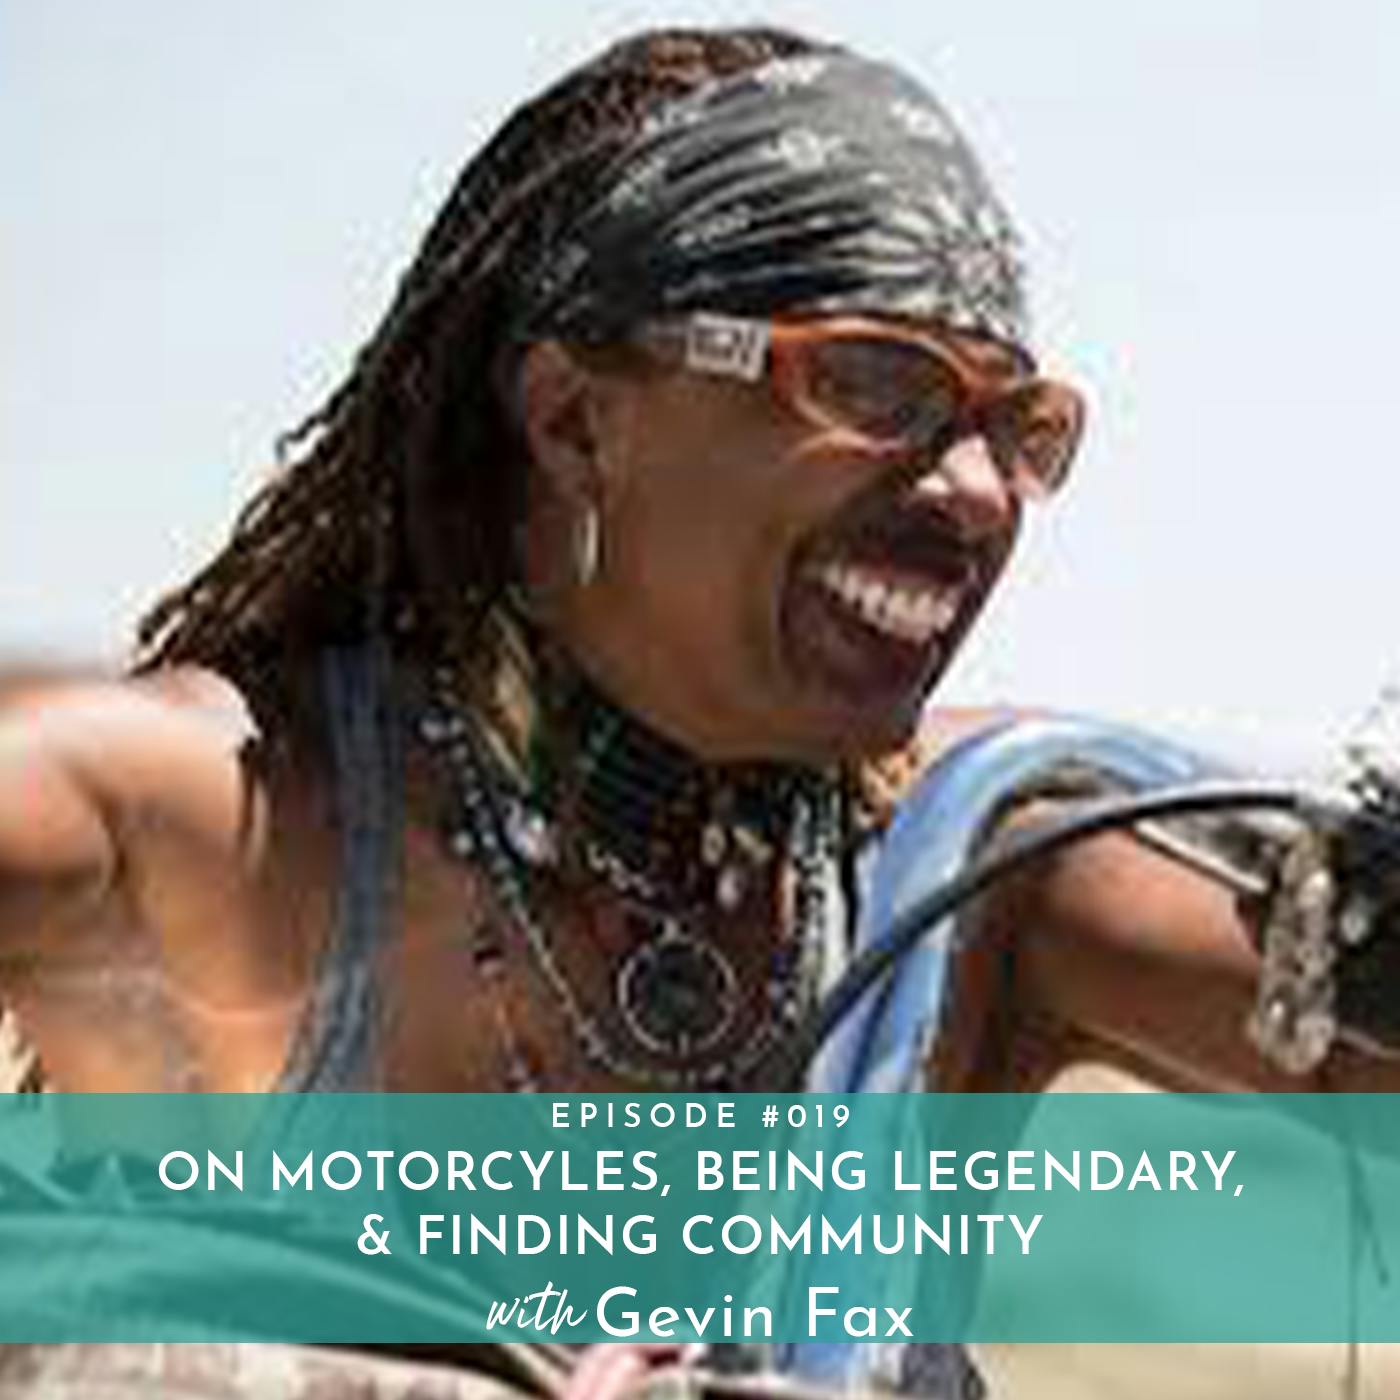 On Motorcycles, Being Legendary, and Finding Community with Gevin Fax